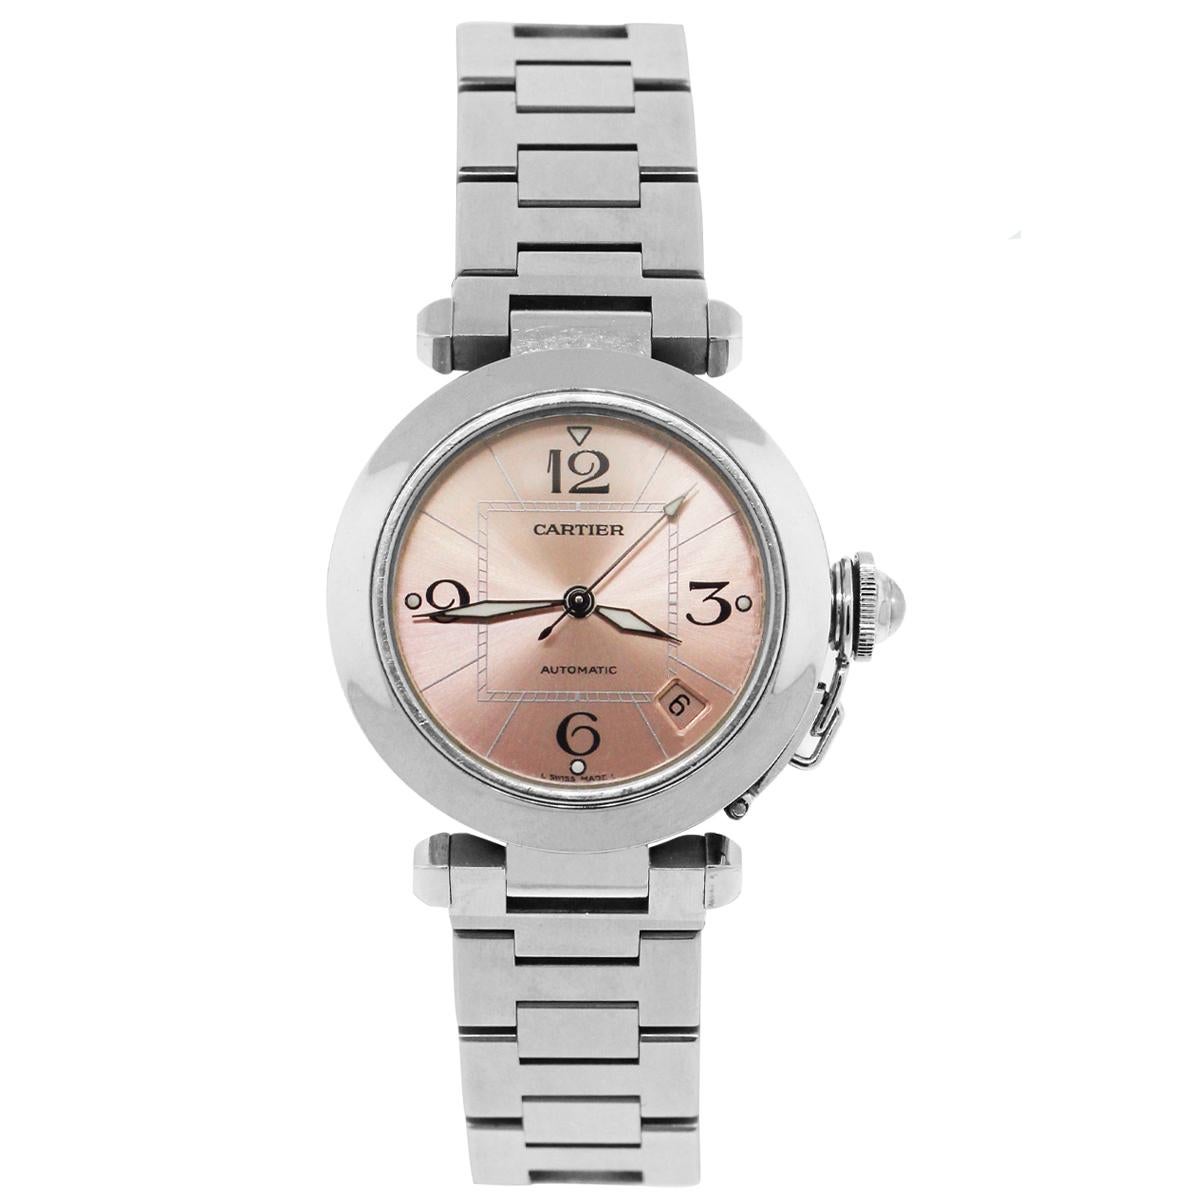 Brand: Cartier
MPN: 2324
Model: Pasha
Case Material: Stainless Steel
Crystal: Sapphire crystal
Bezel: Stainless Steel smooth fixed bezel
Dial: Pink dial with Black  luminescent hour markers and hands. Date is displayed in between 4 and 5 o'